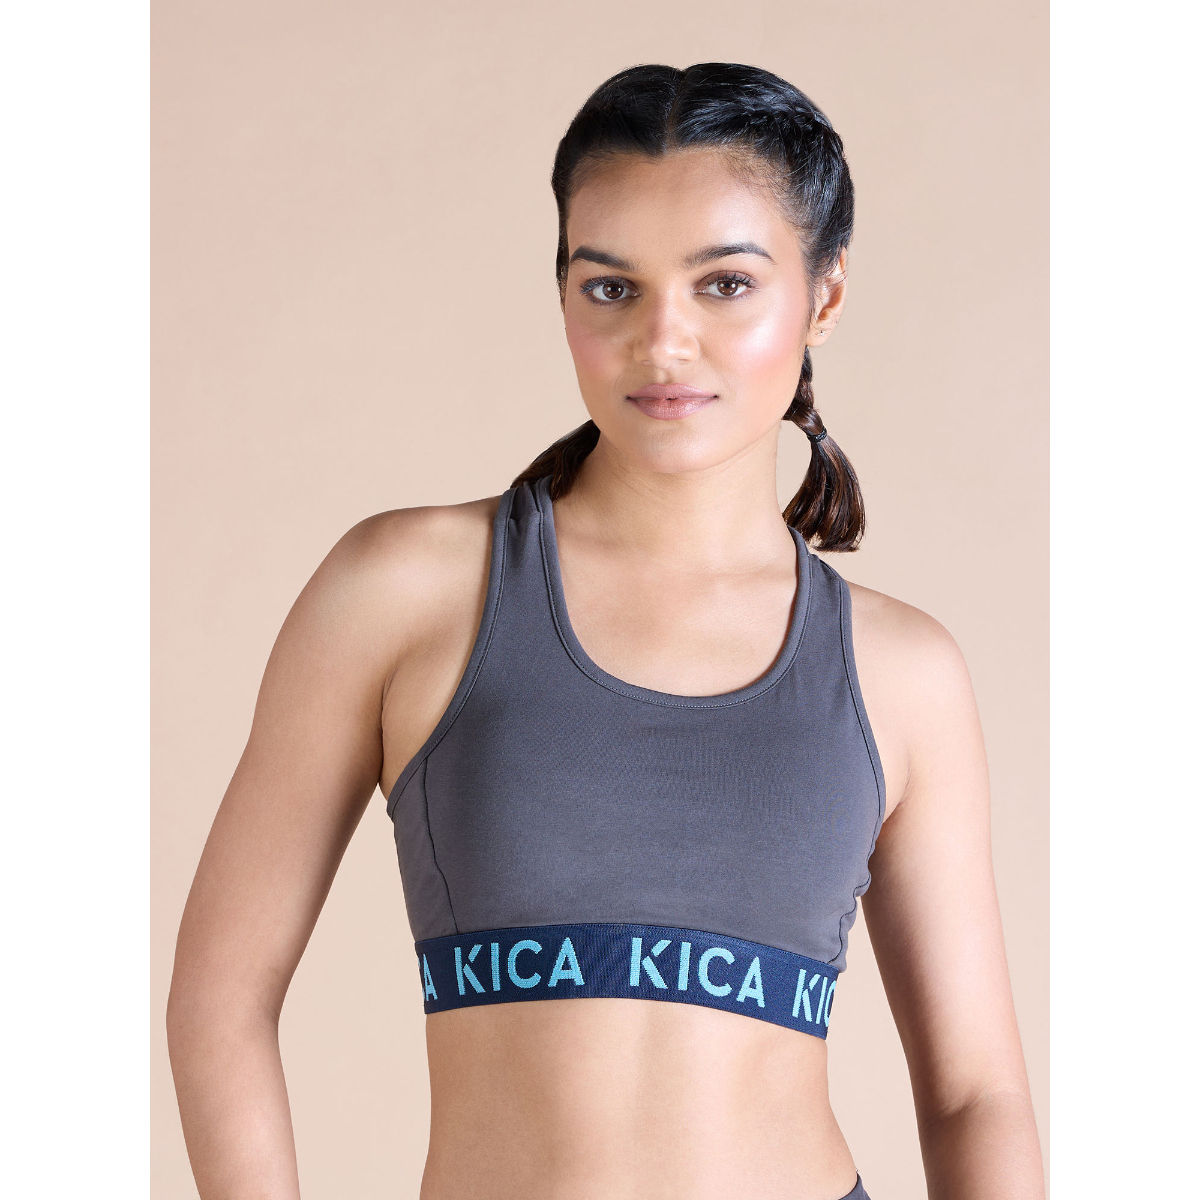 Kica Low to Mid Impact Cotton Sports Bra For Low to Mid Activities (L)